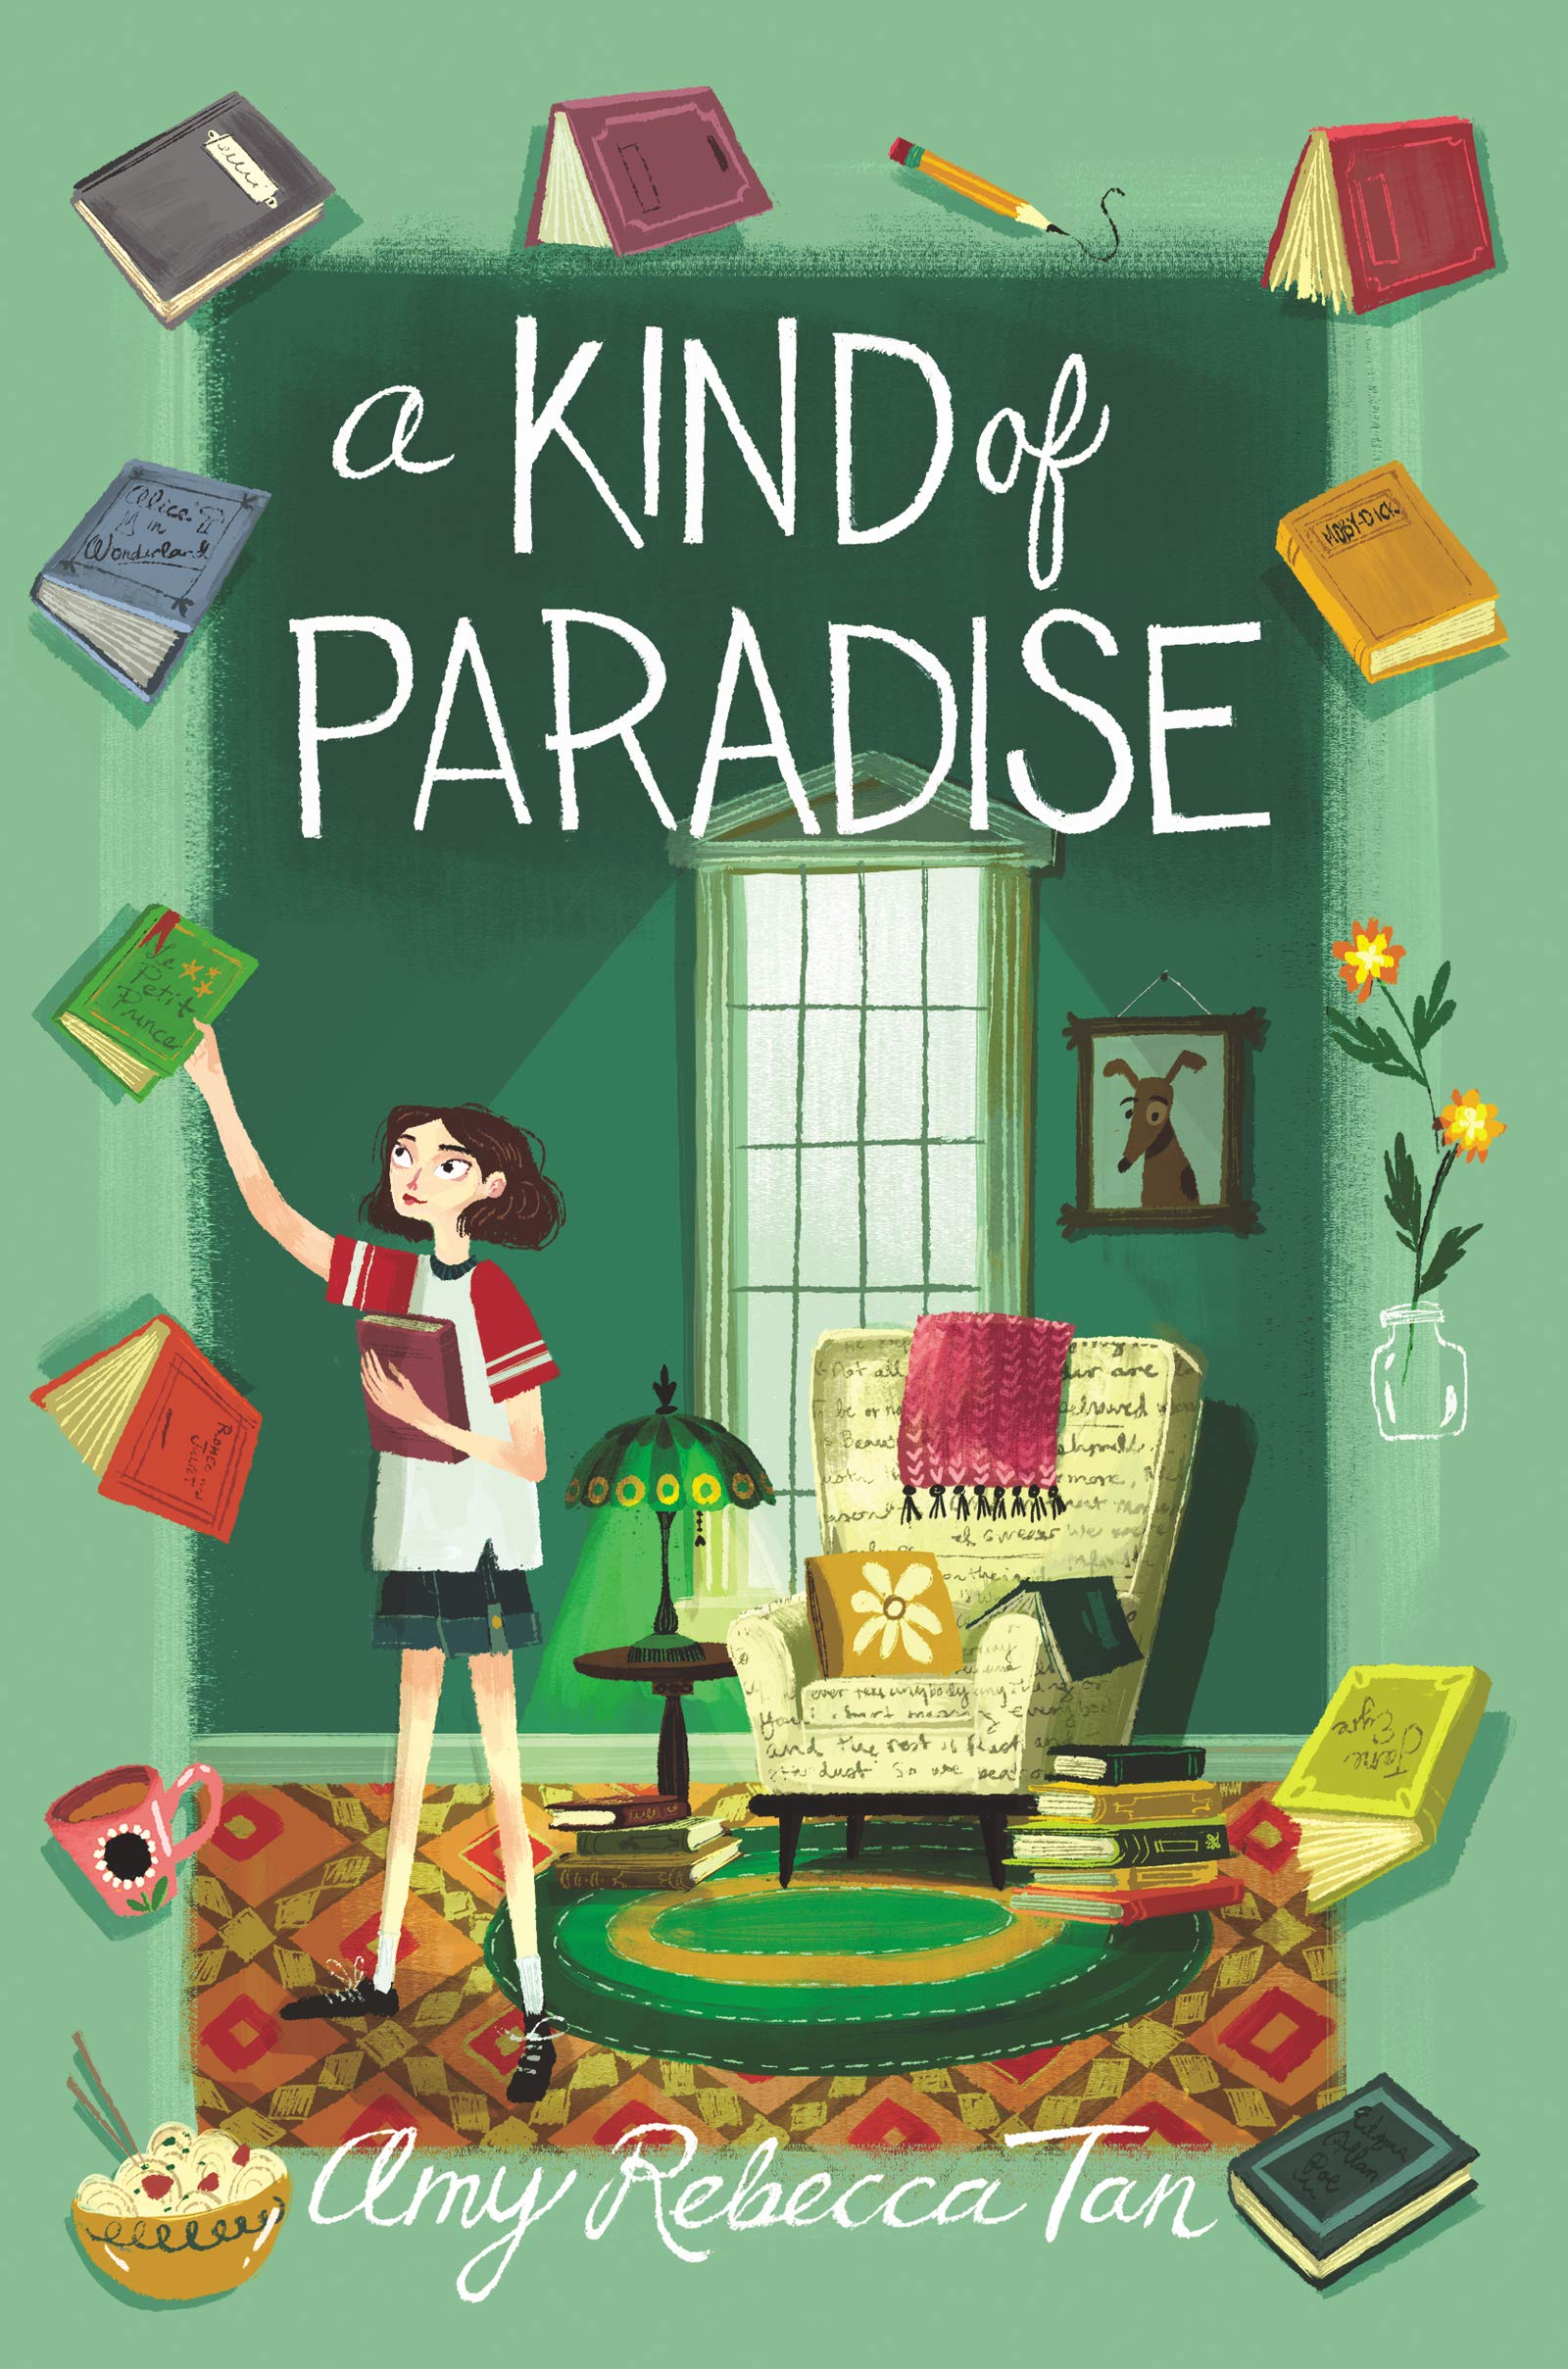 A Kind of Paradise by Amy Rebecca Tan